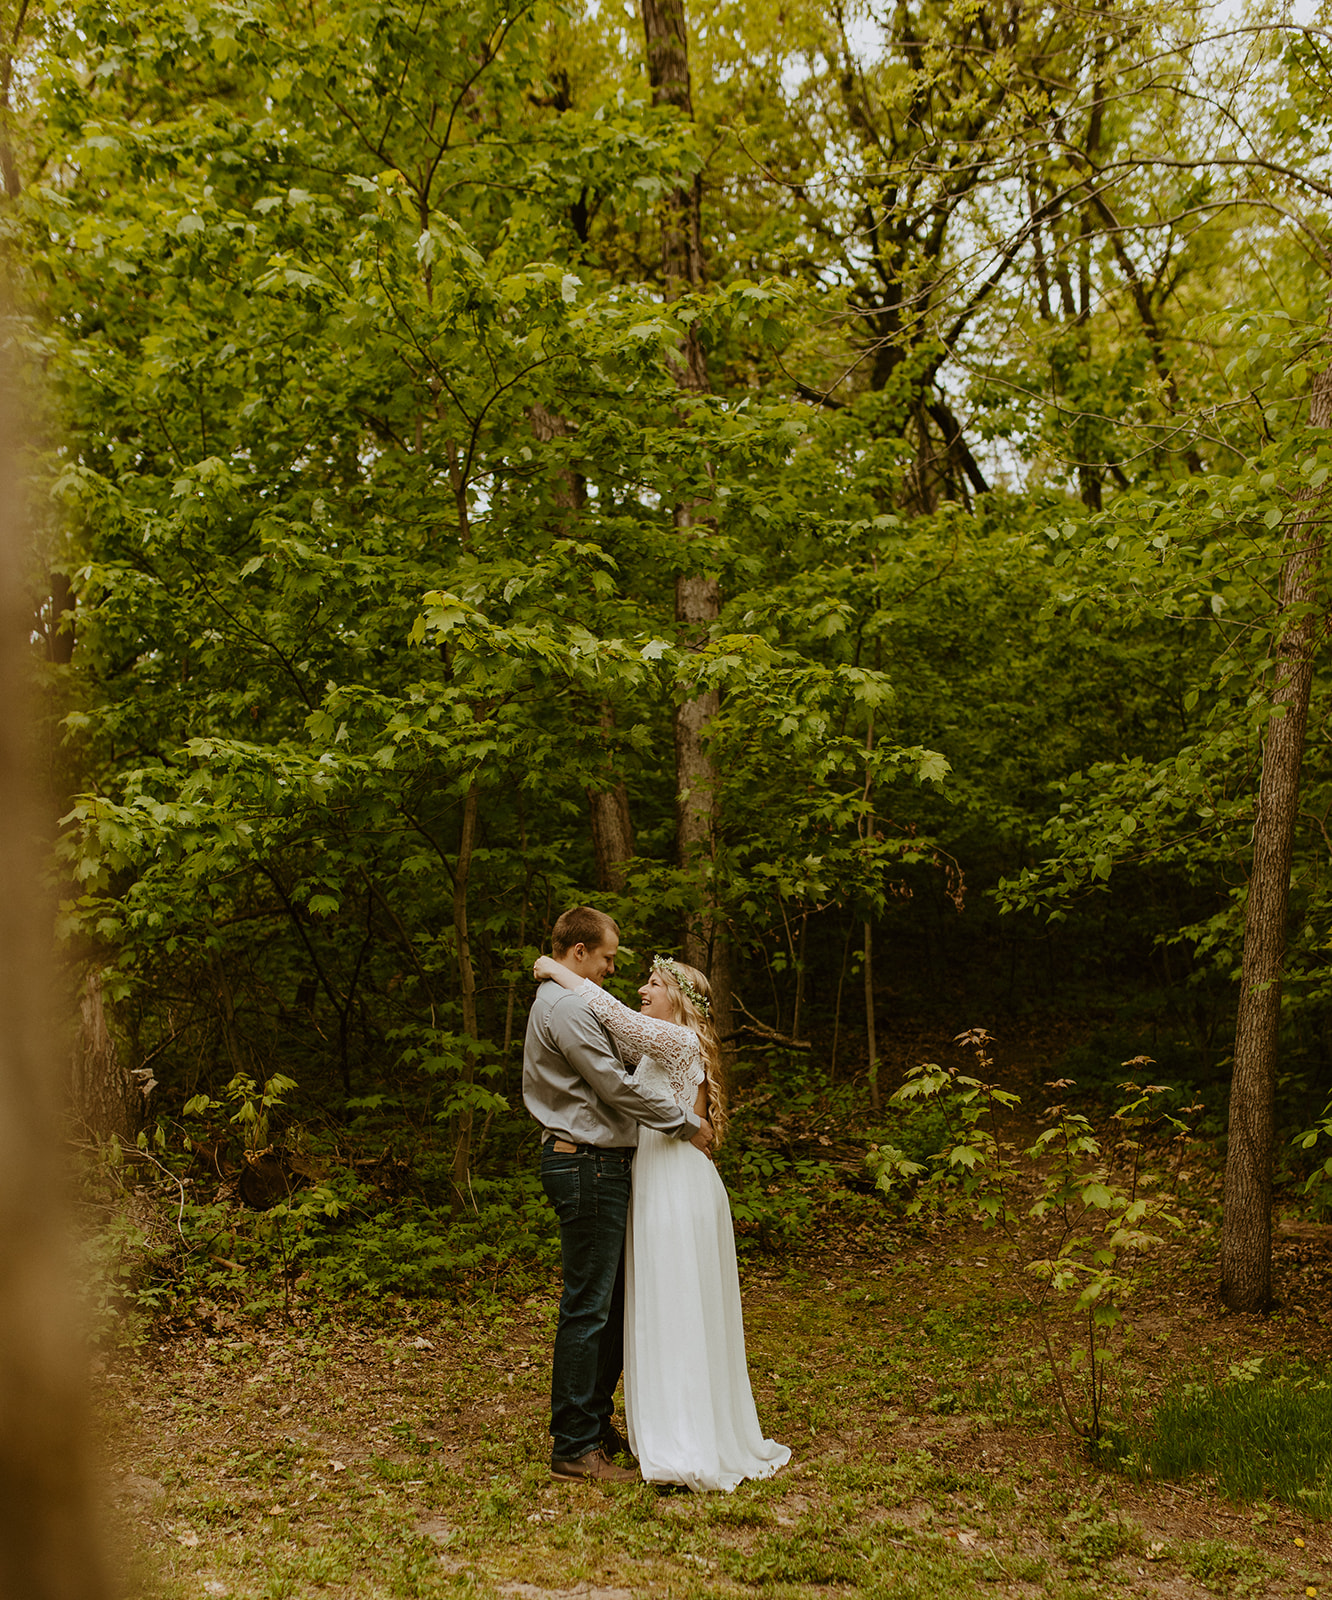 backyard wooded wedding in Madison, Wisconsin area by Annika Frame Photography